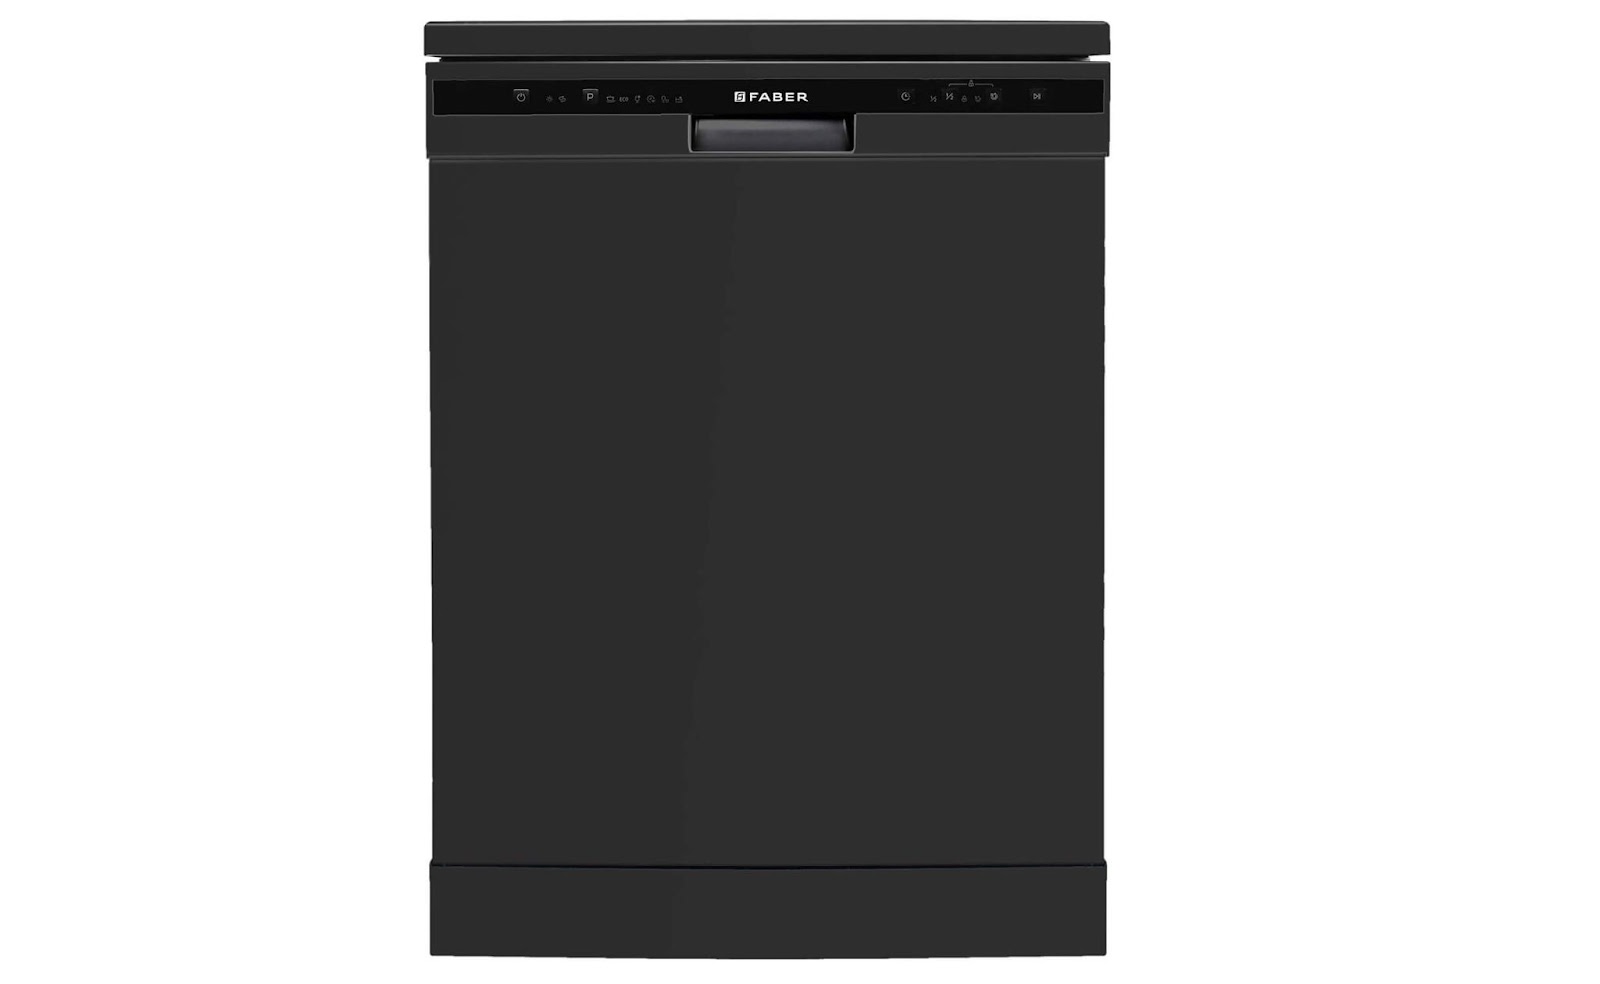 2. Faber 12 Place Settings Dishwasher - Click here for the Amazon Deal